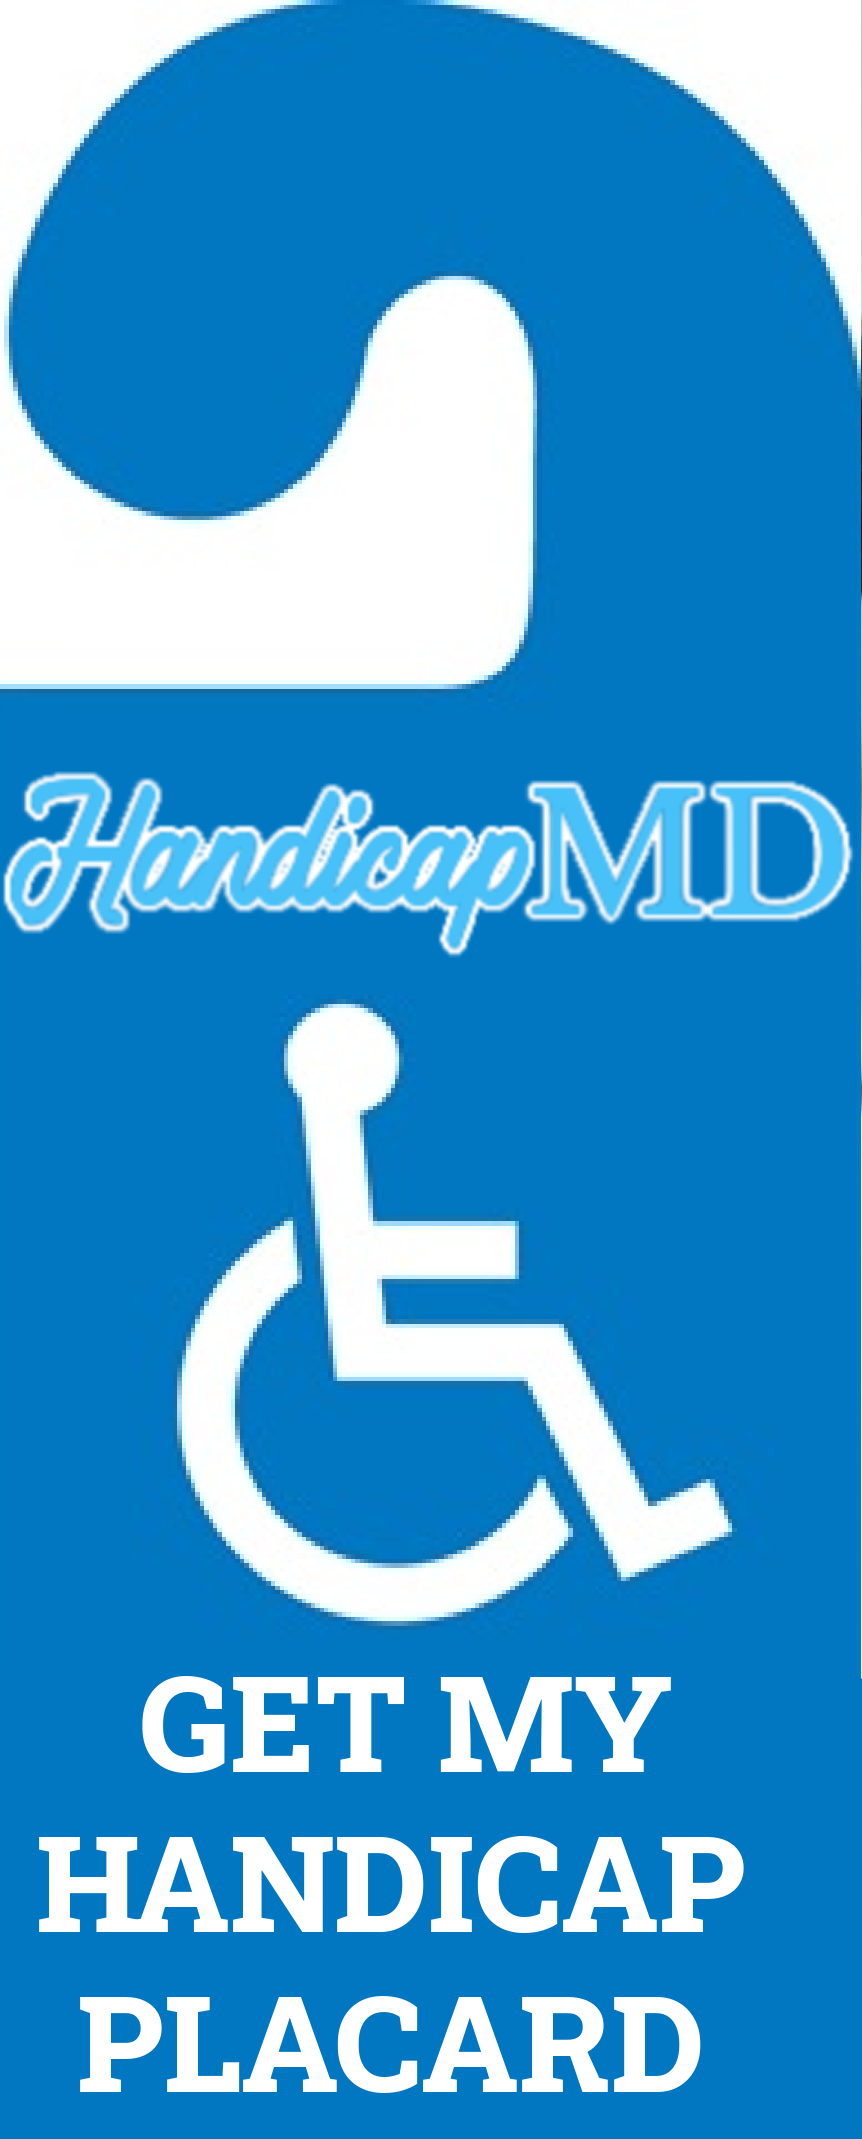 How to Obtain a Disabled Parking Permit in Philadelphia PA